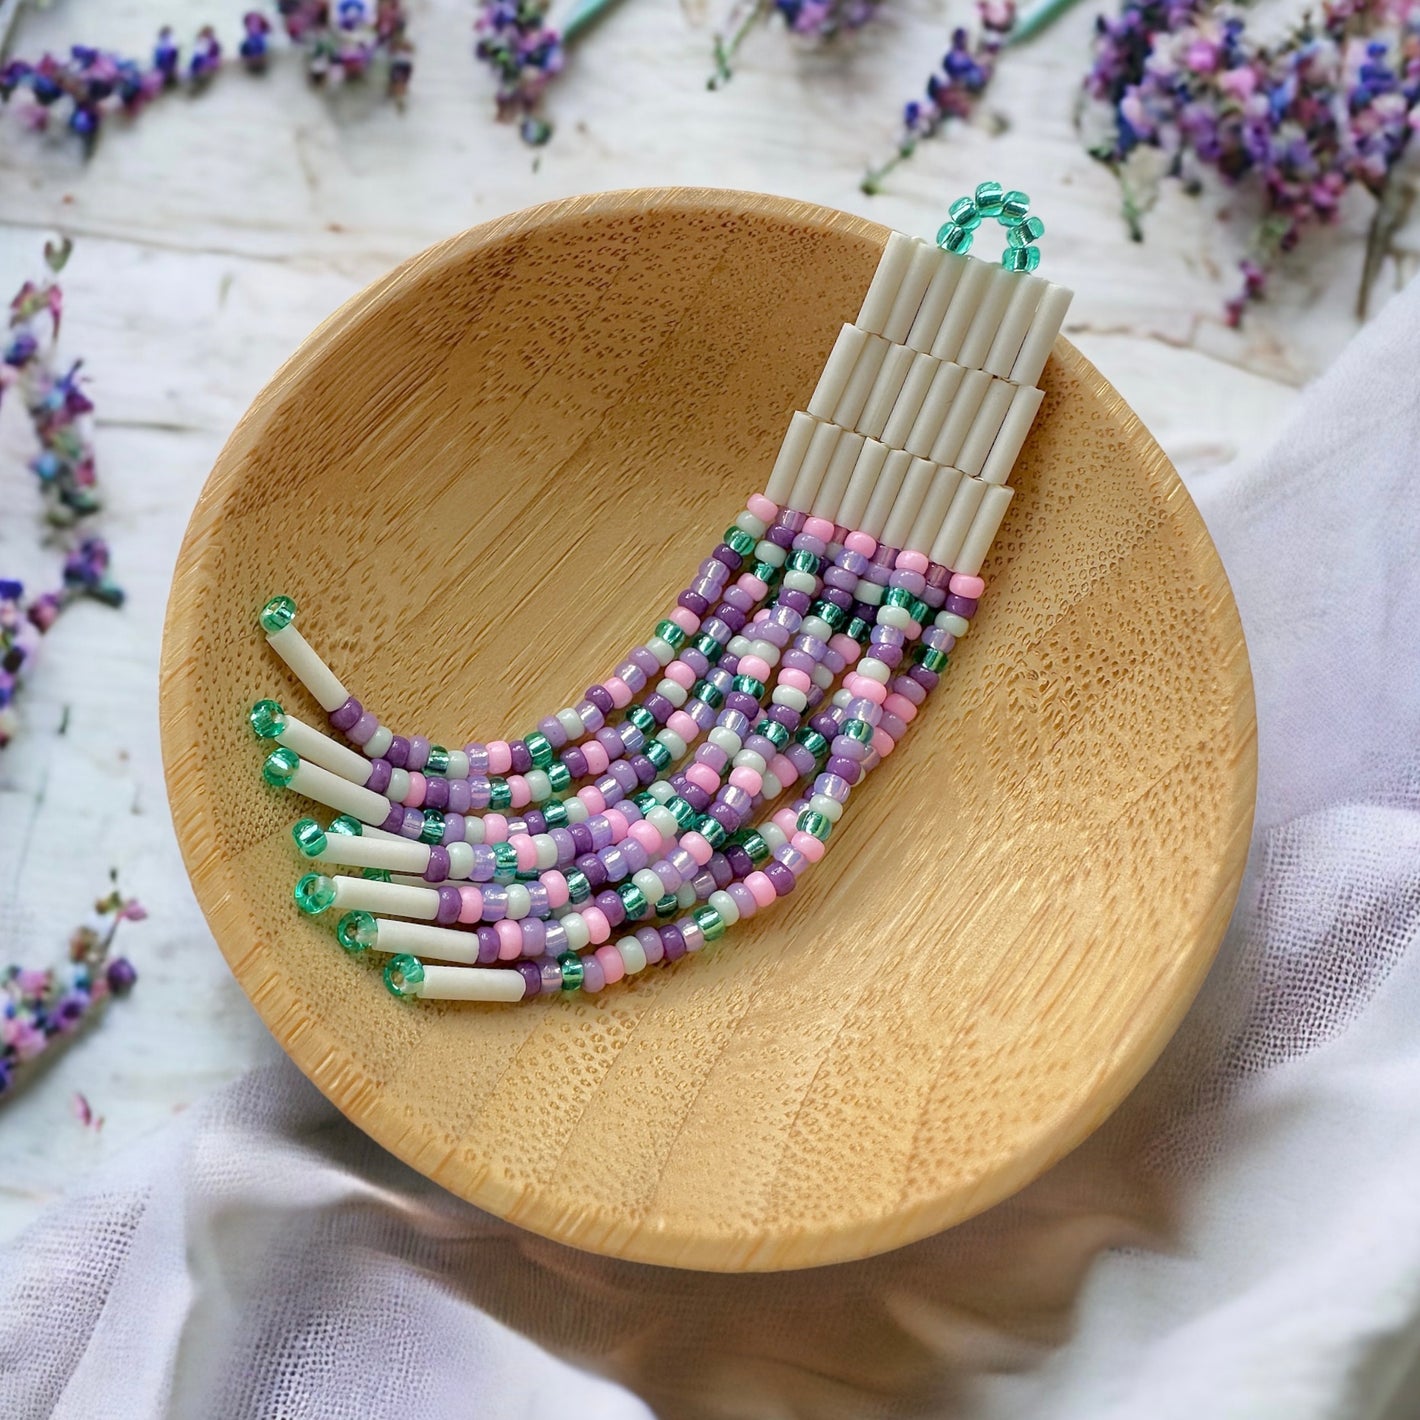 Bugle bead fringe earrings made with cream bugle beads and 11/0 Miyuki seed beads in shades of purple, pink, and teal green in a woodern dish